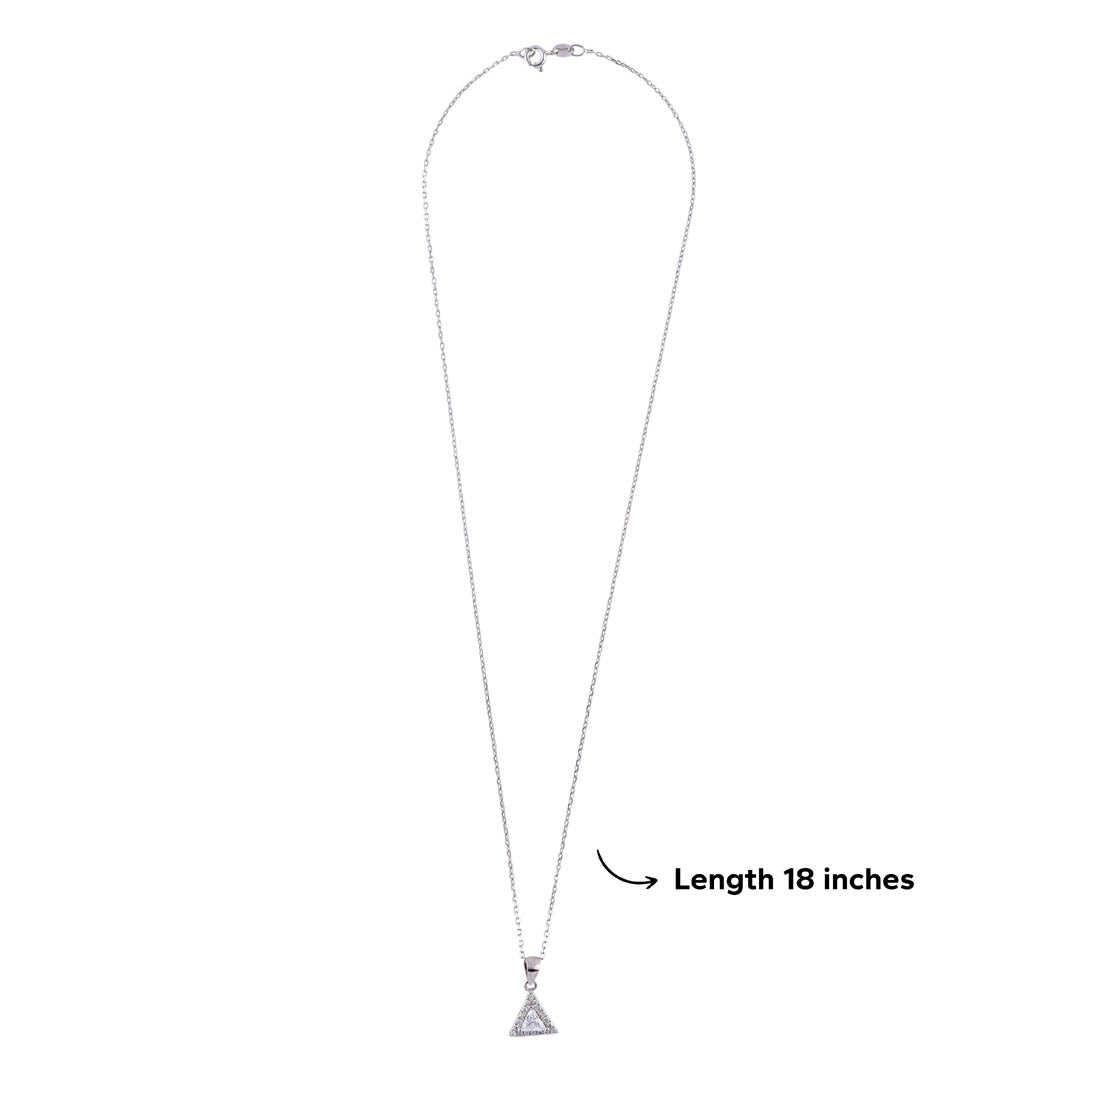 Silver Set Chain Triangular Pendant and Earrings with Stones for Women